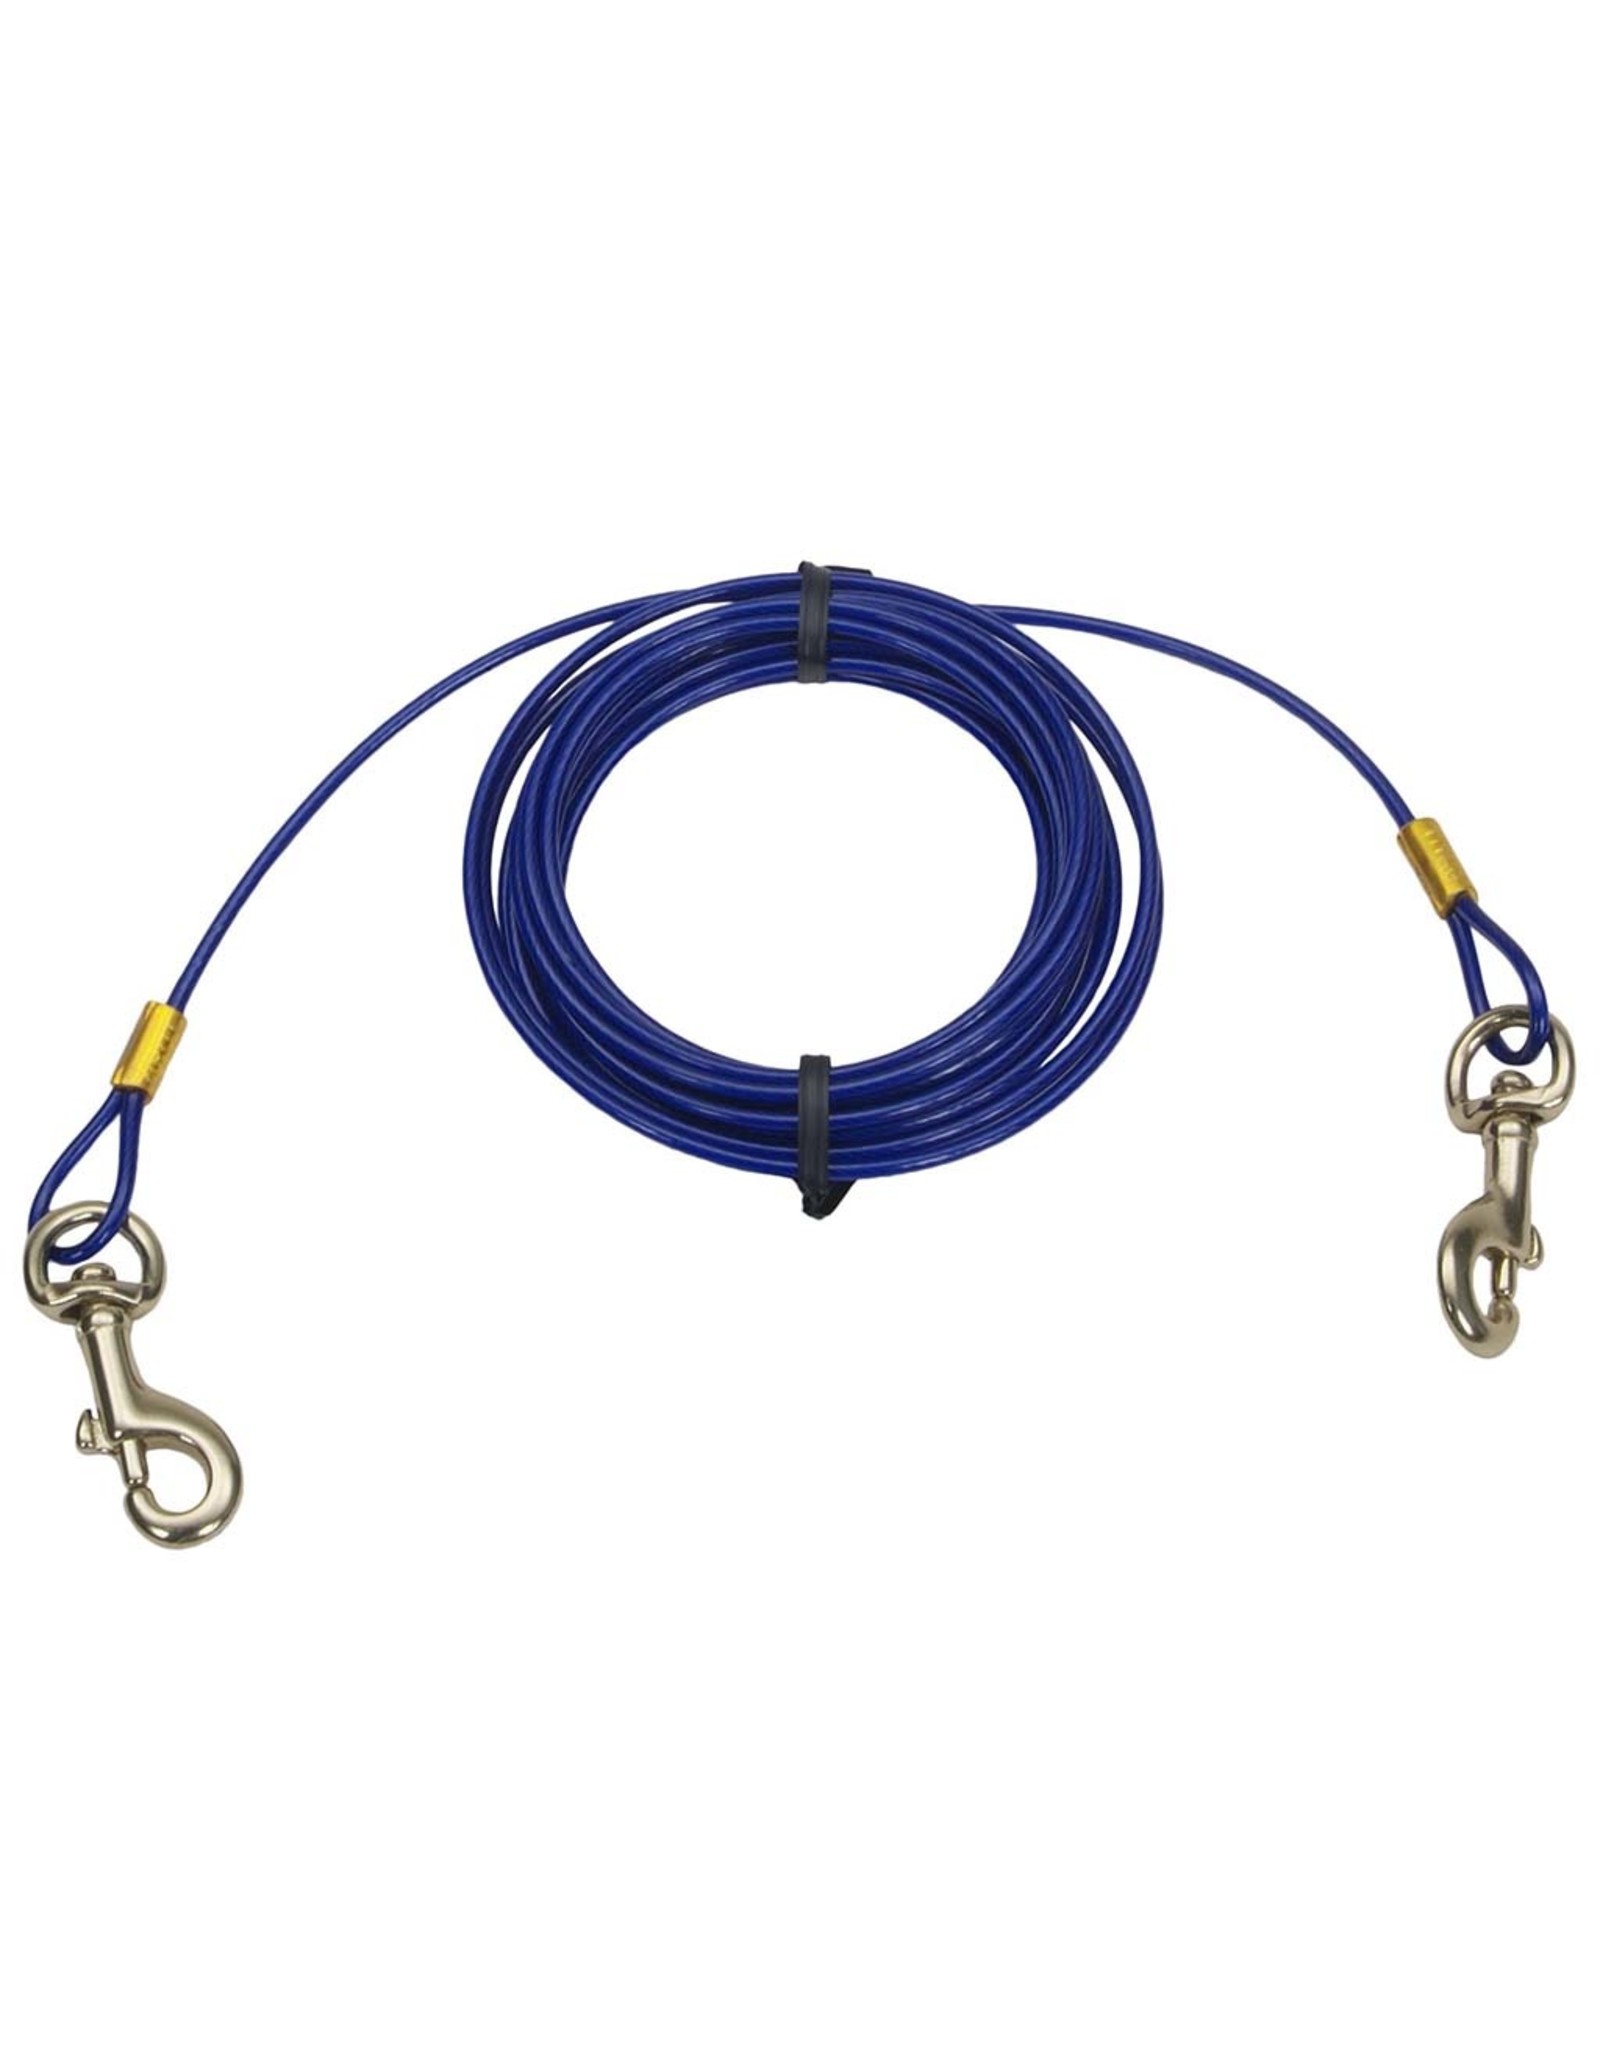 Coastal Pet Products Titan Tie Out Cable